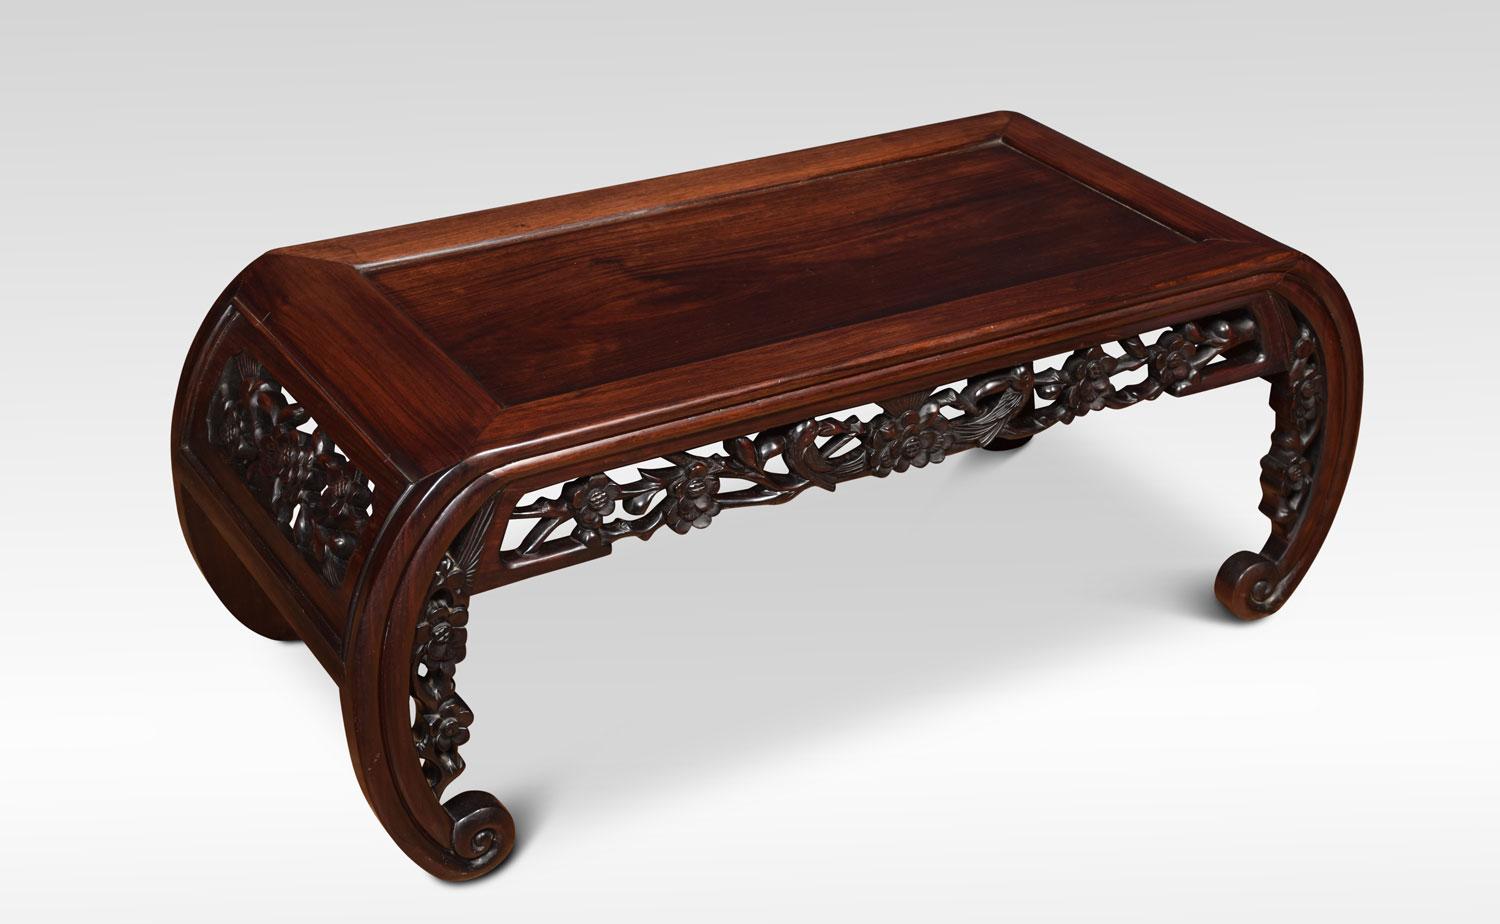 Chinese hardwood opium table, the rectangular panelled top above a pierced and foliate-carved frieze and sides, all raised up on curved scrolling legs.
Dimensions:
Height 13.5 inches
Width 35.5 inches
Depth 15.5 inches.